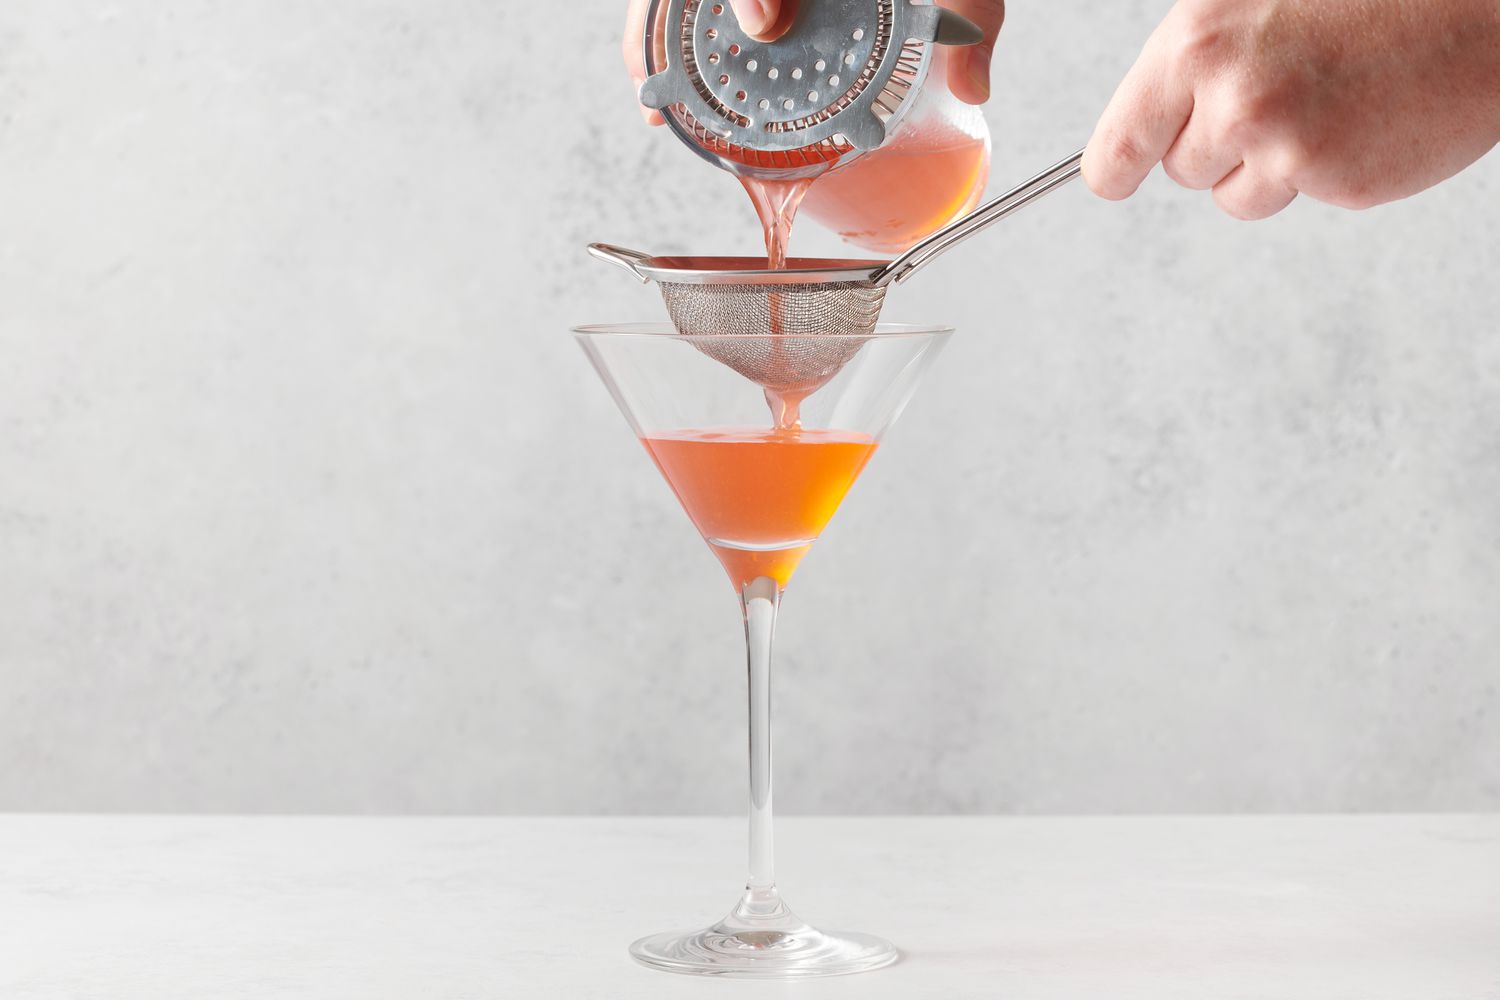 A hand pouring a strawberry martini through two strainers into a martini glass from a cocktail shaker